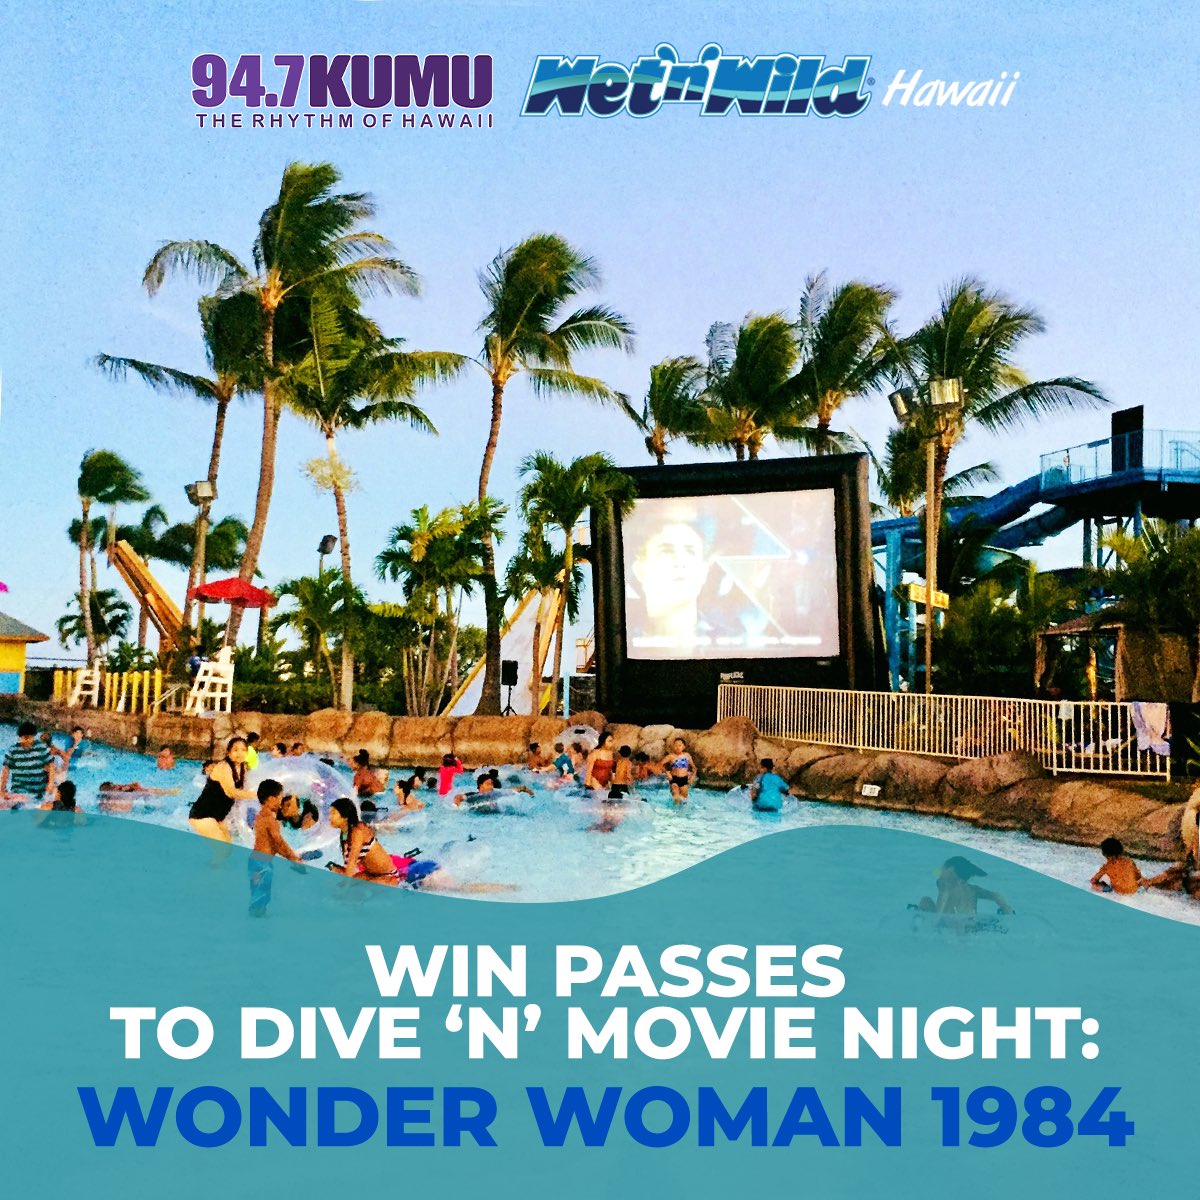 Meet us @WetnWildHawaii! Listen all week to the Rise & Drive for your chance to win passes to their Dive n Movie, Wonder Woman 1984 on Saturday May 29. Park hours are 10:30am - 9pm, the movie is included! Show up in neon swimwear and get in for $19.84 ea + tax after 4p #947KUMU https://t.co/kVNl15nZDP